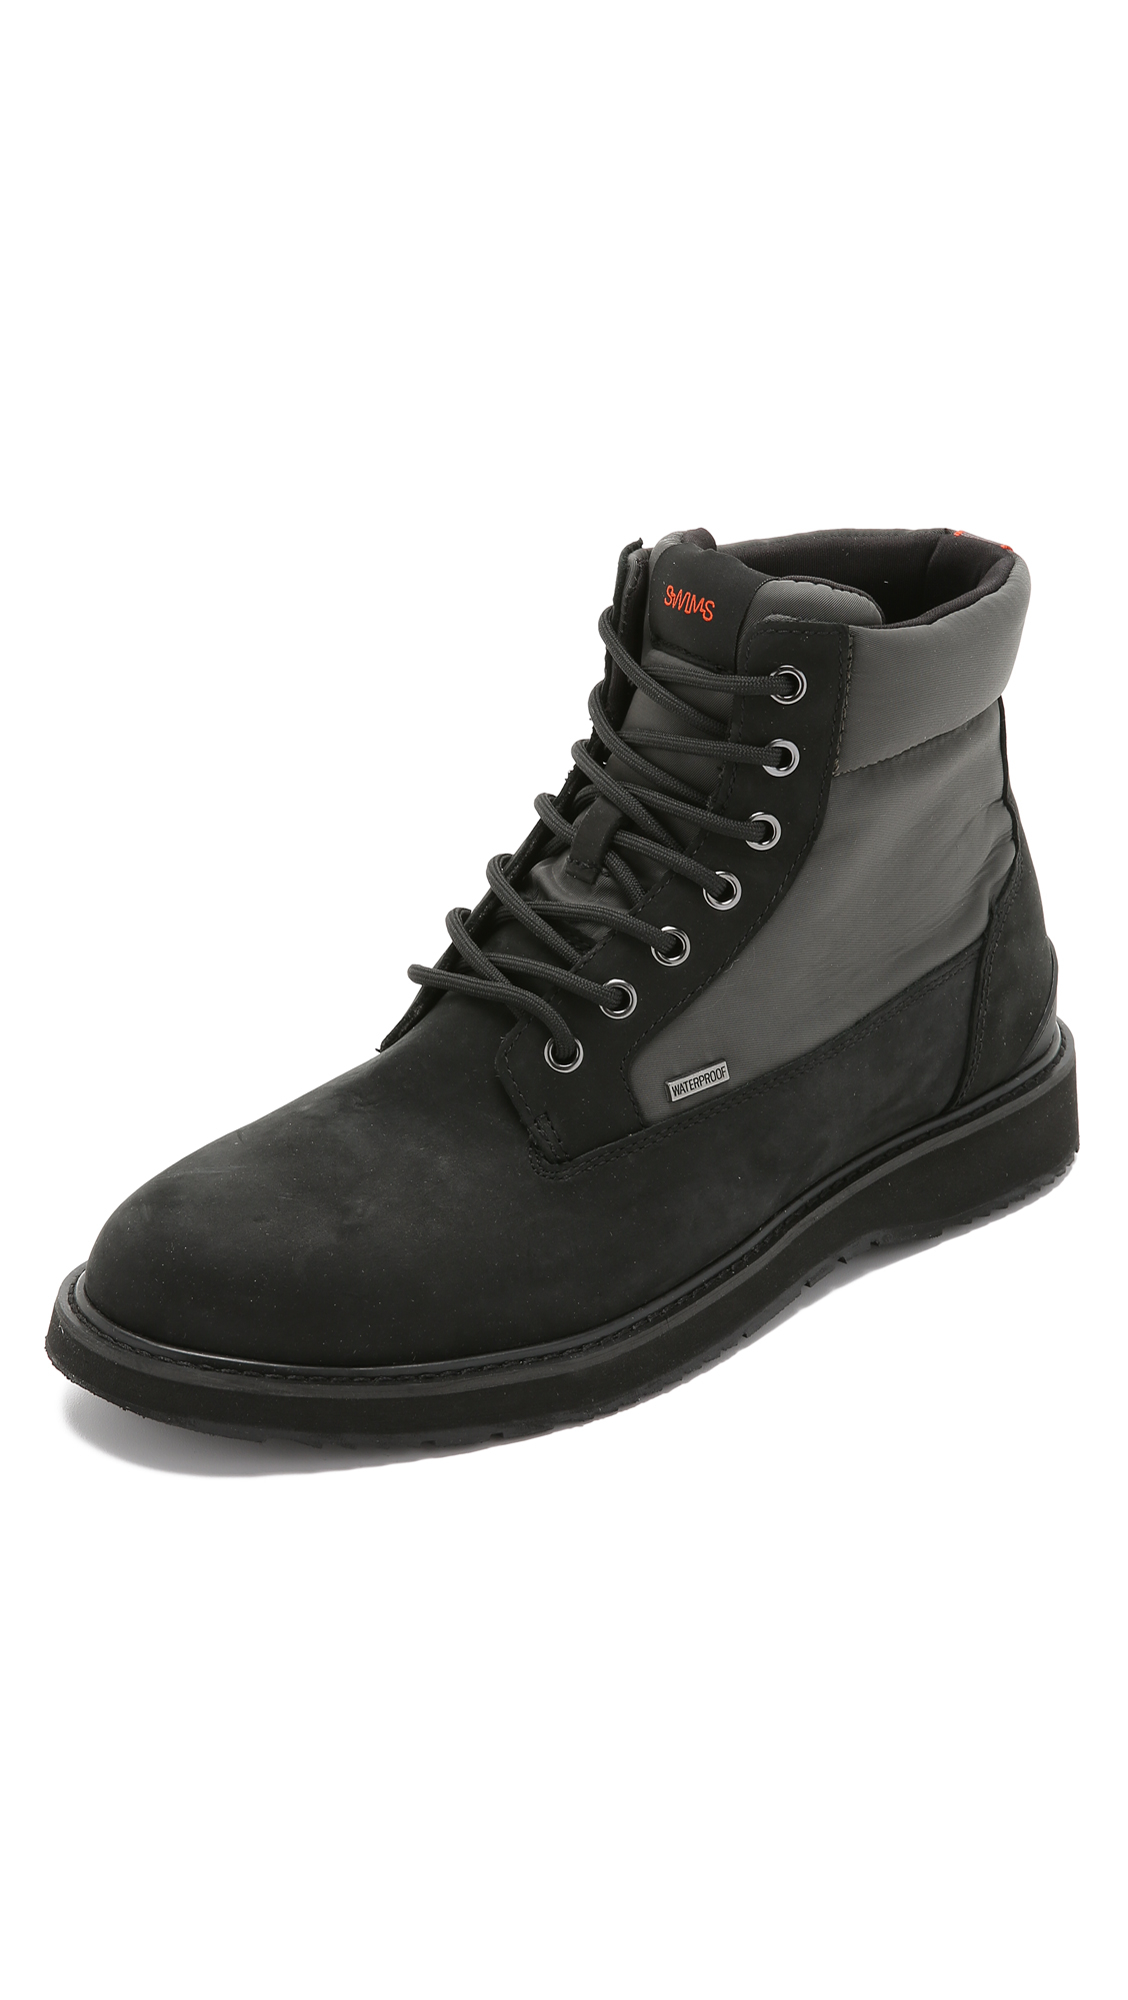 Swims Barry Work Boots in Black for Men - Lyst